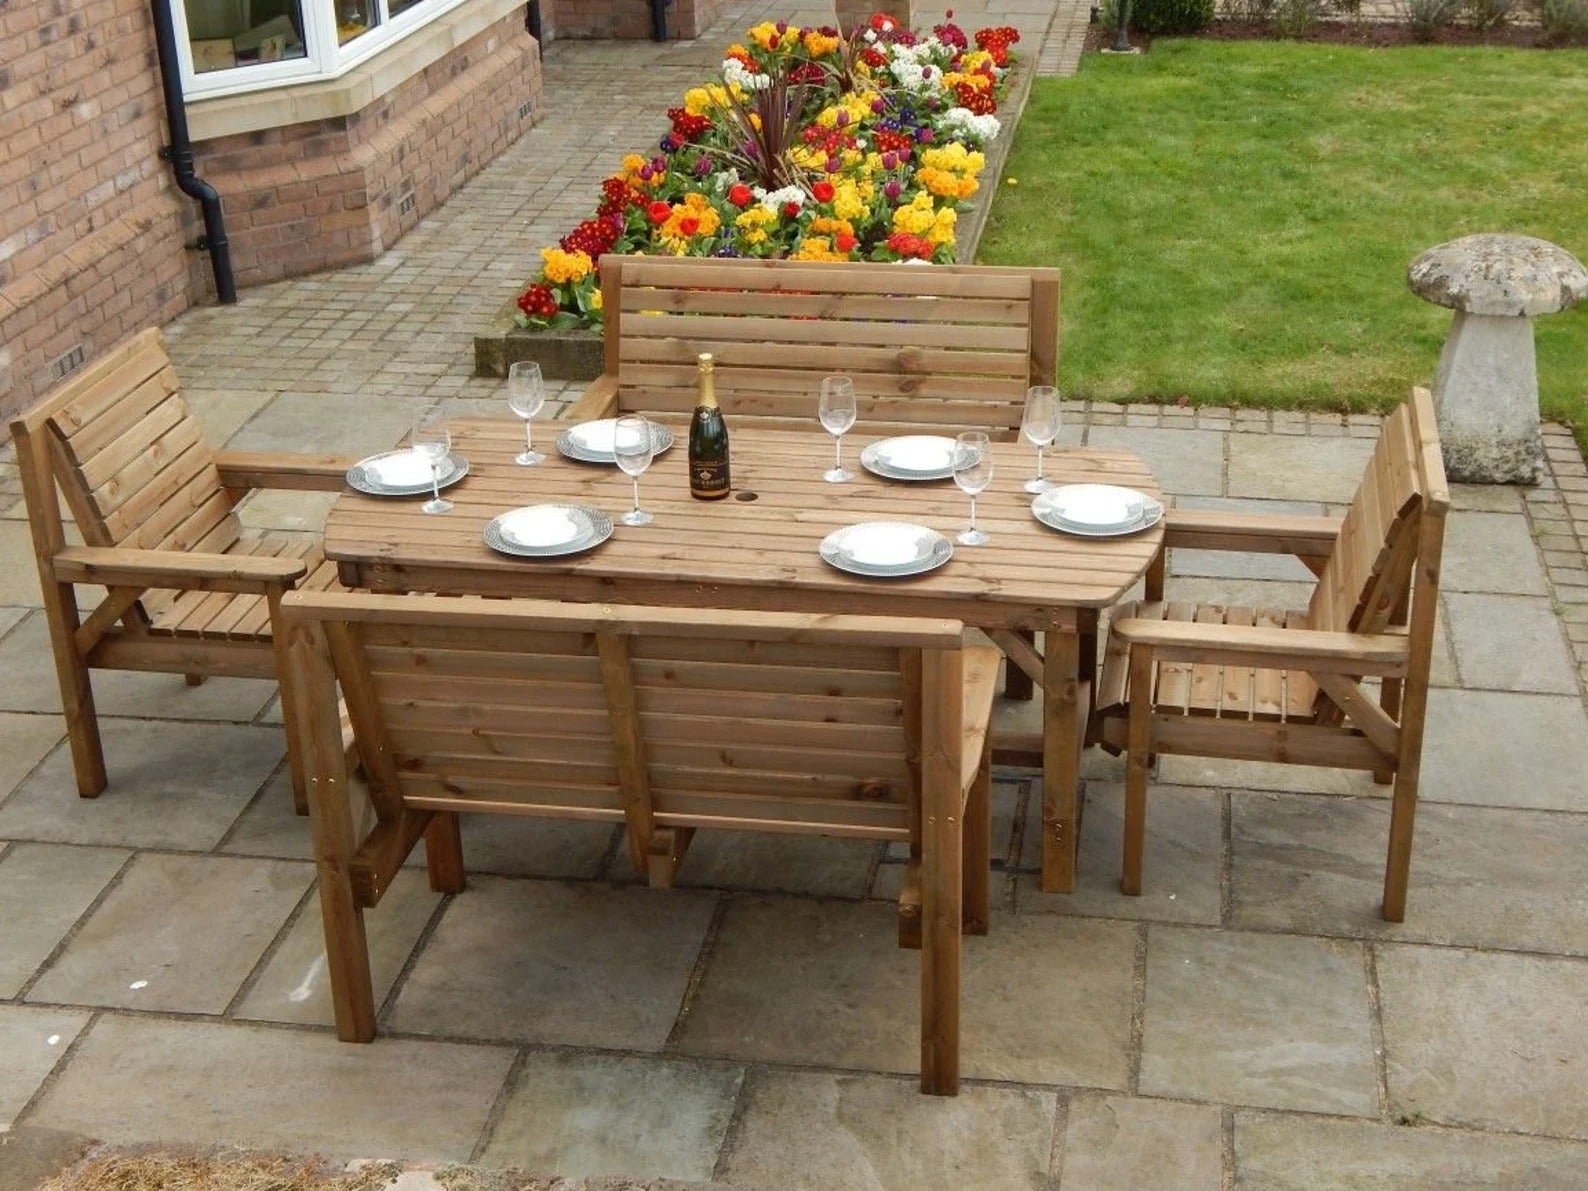 Light wooden table with plates and glasses surrounded by matching chairs and benches on a stone patio